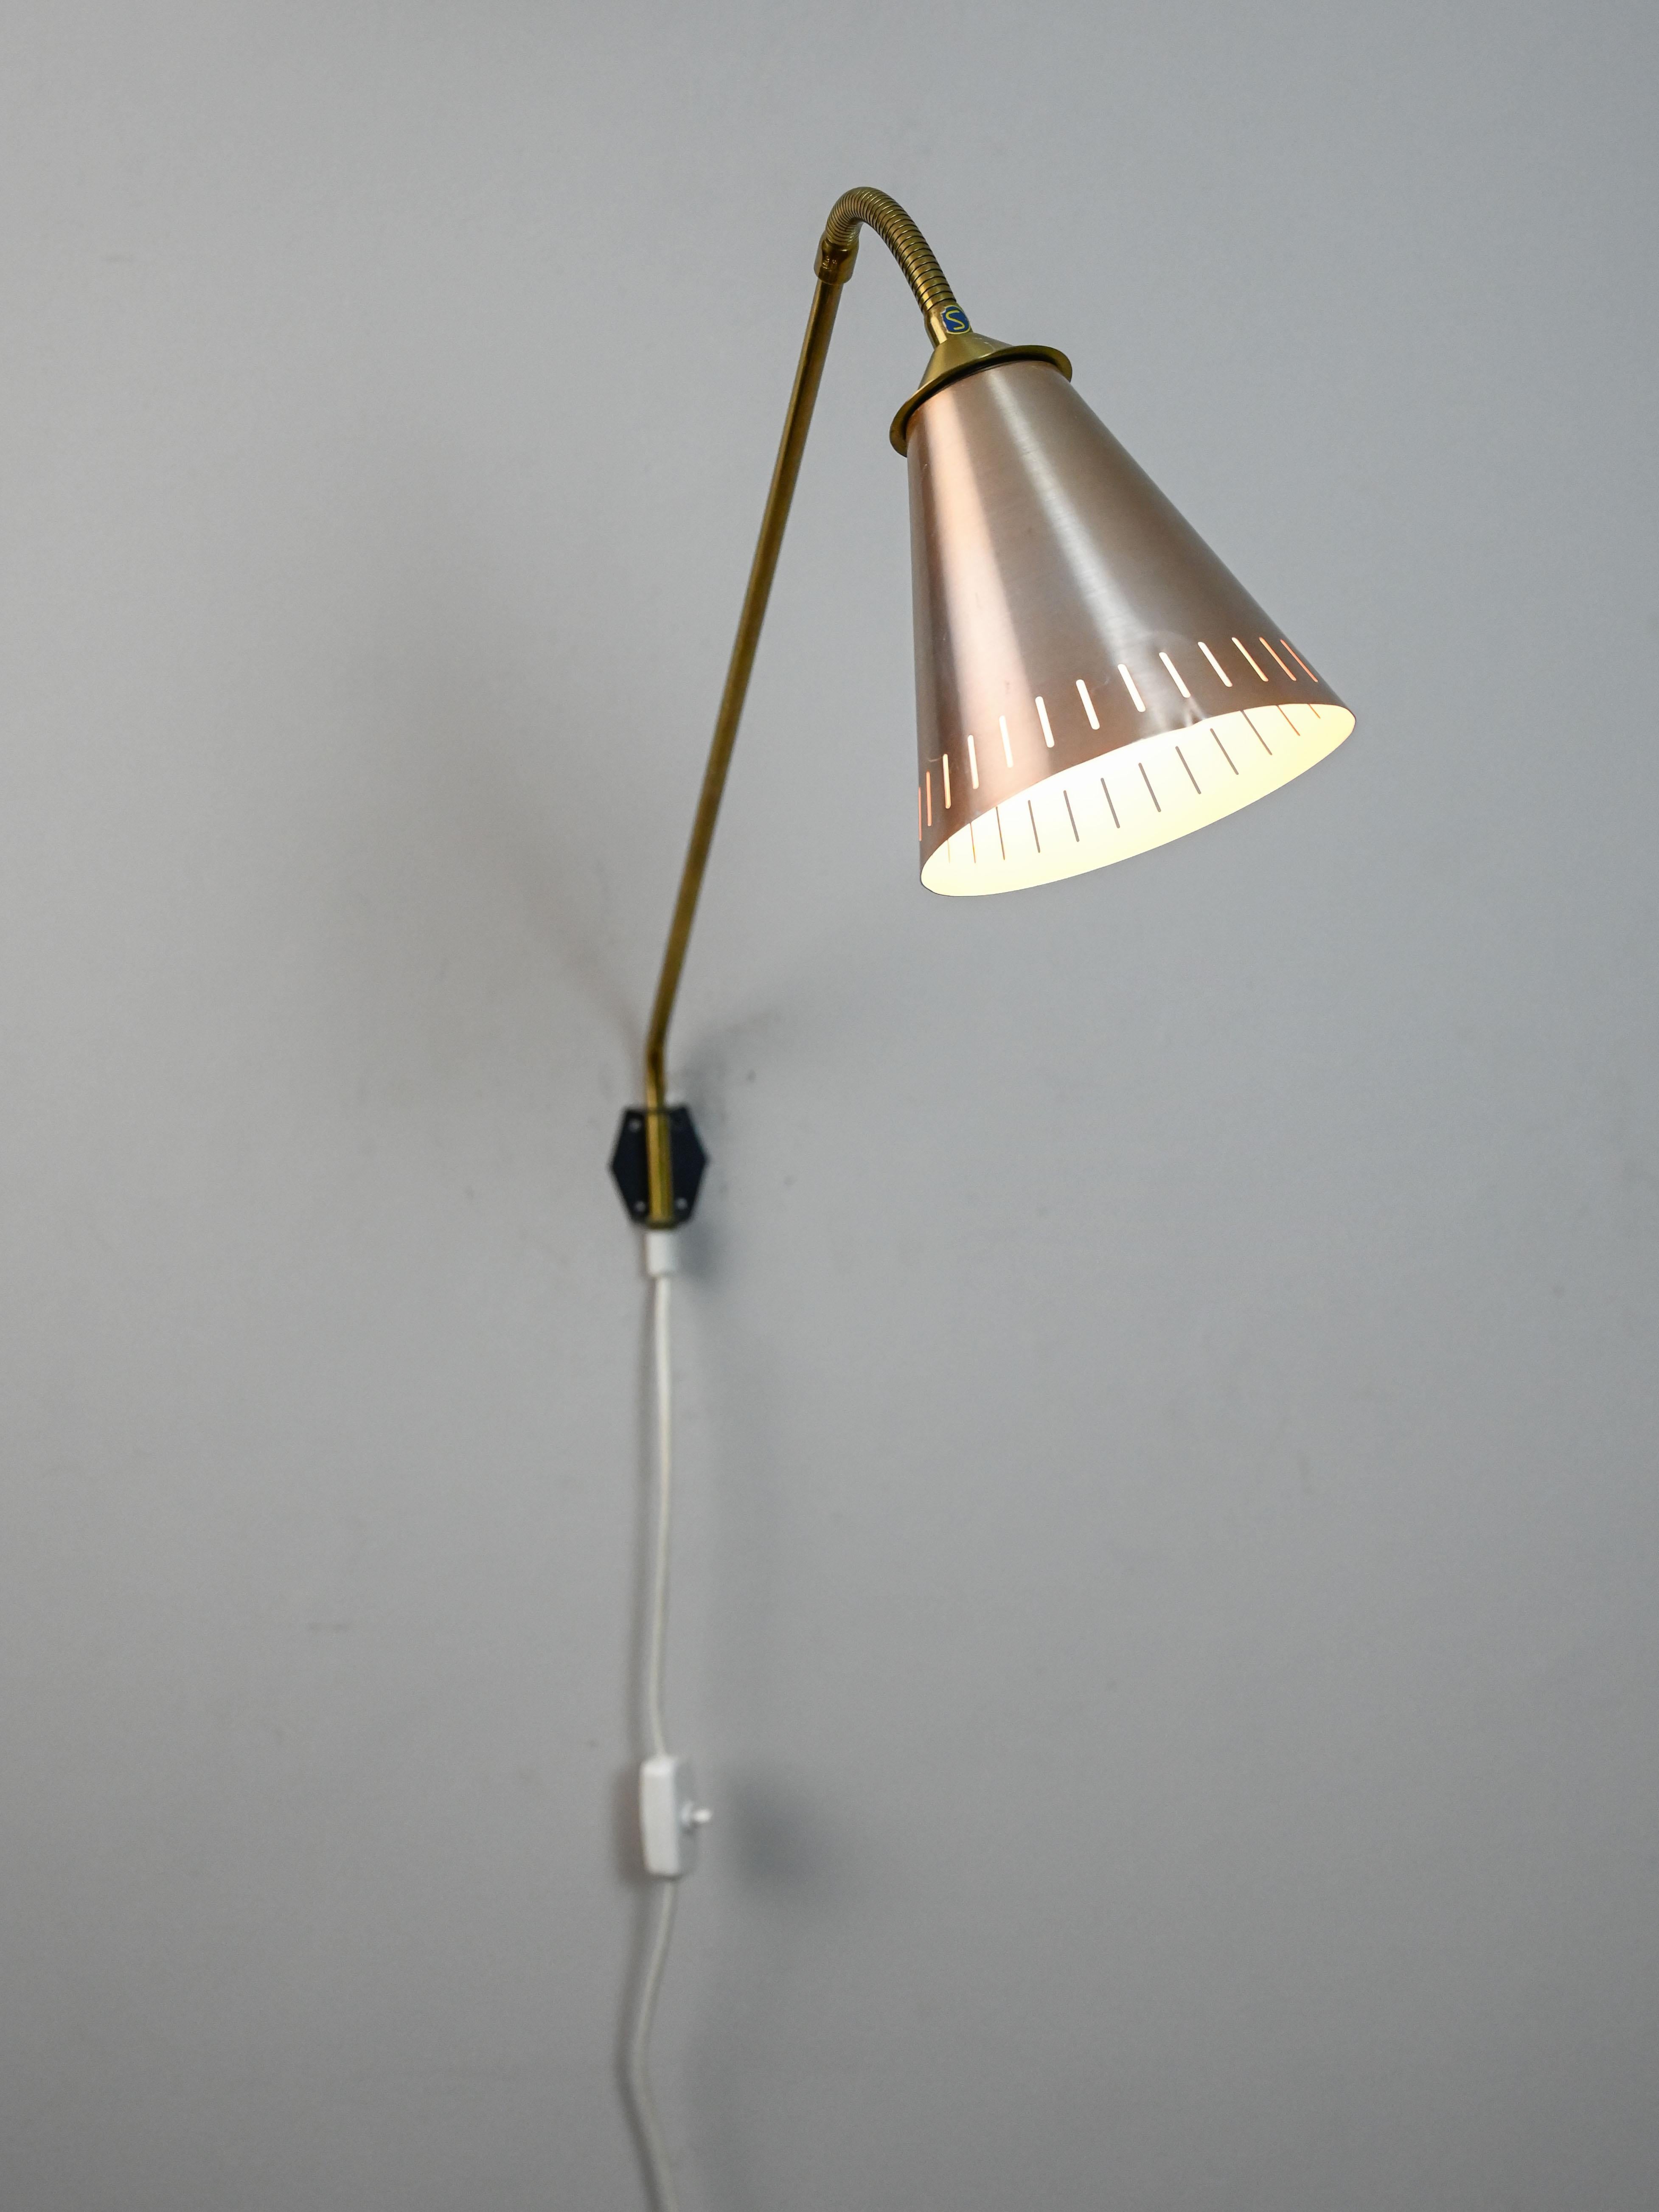 Scandinavian-made directional wall lamp. 

This vintage Swedish design piece consists of a gold-plated metal arm and a chrome-plated sheet metal shade.
With the ability to direct the light, it can be used as a table lamp, bedroom lamp or to